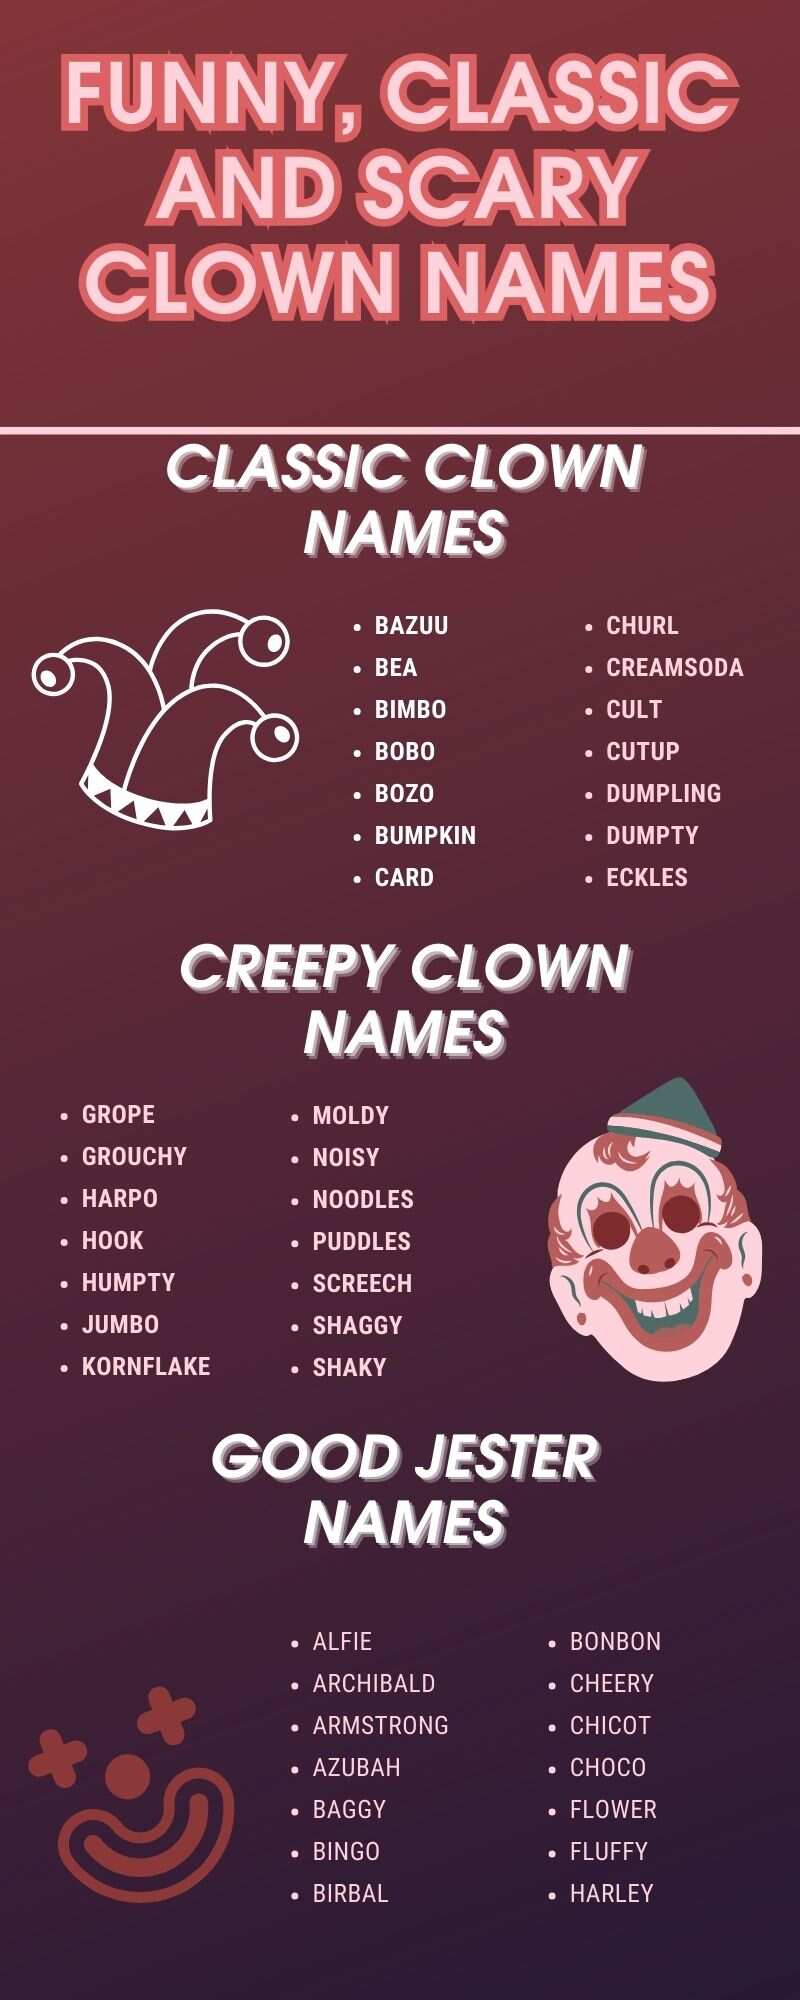 Funny, classic and scary clown names